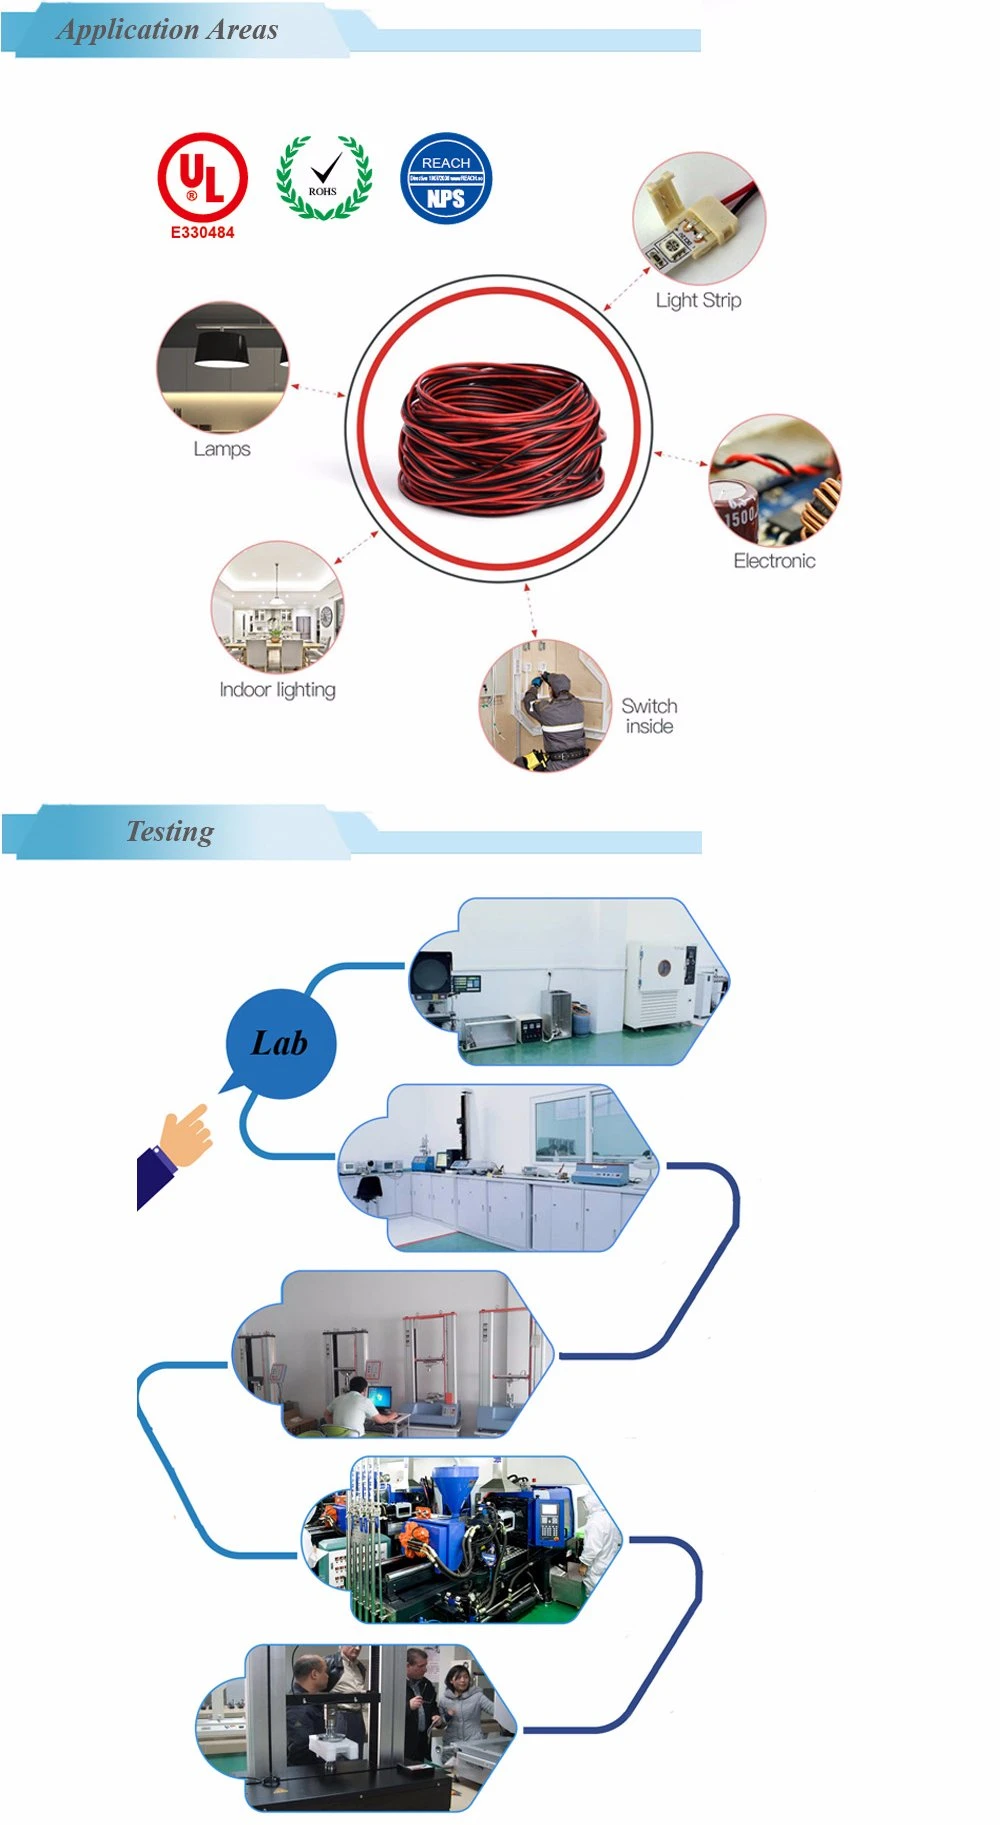 26AWG Multi Core Electric Cable with Stranded Tinned Copper for Electronic Equipment in Class 2 Systems